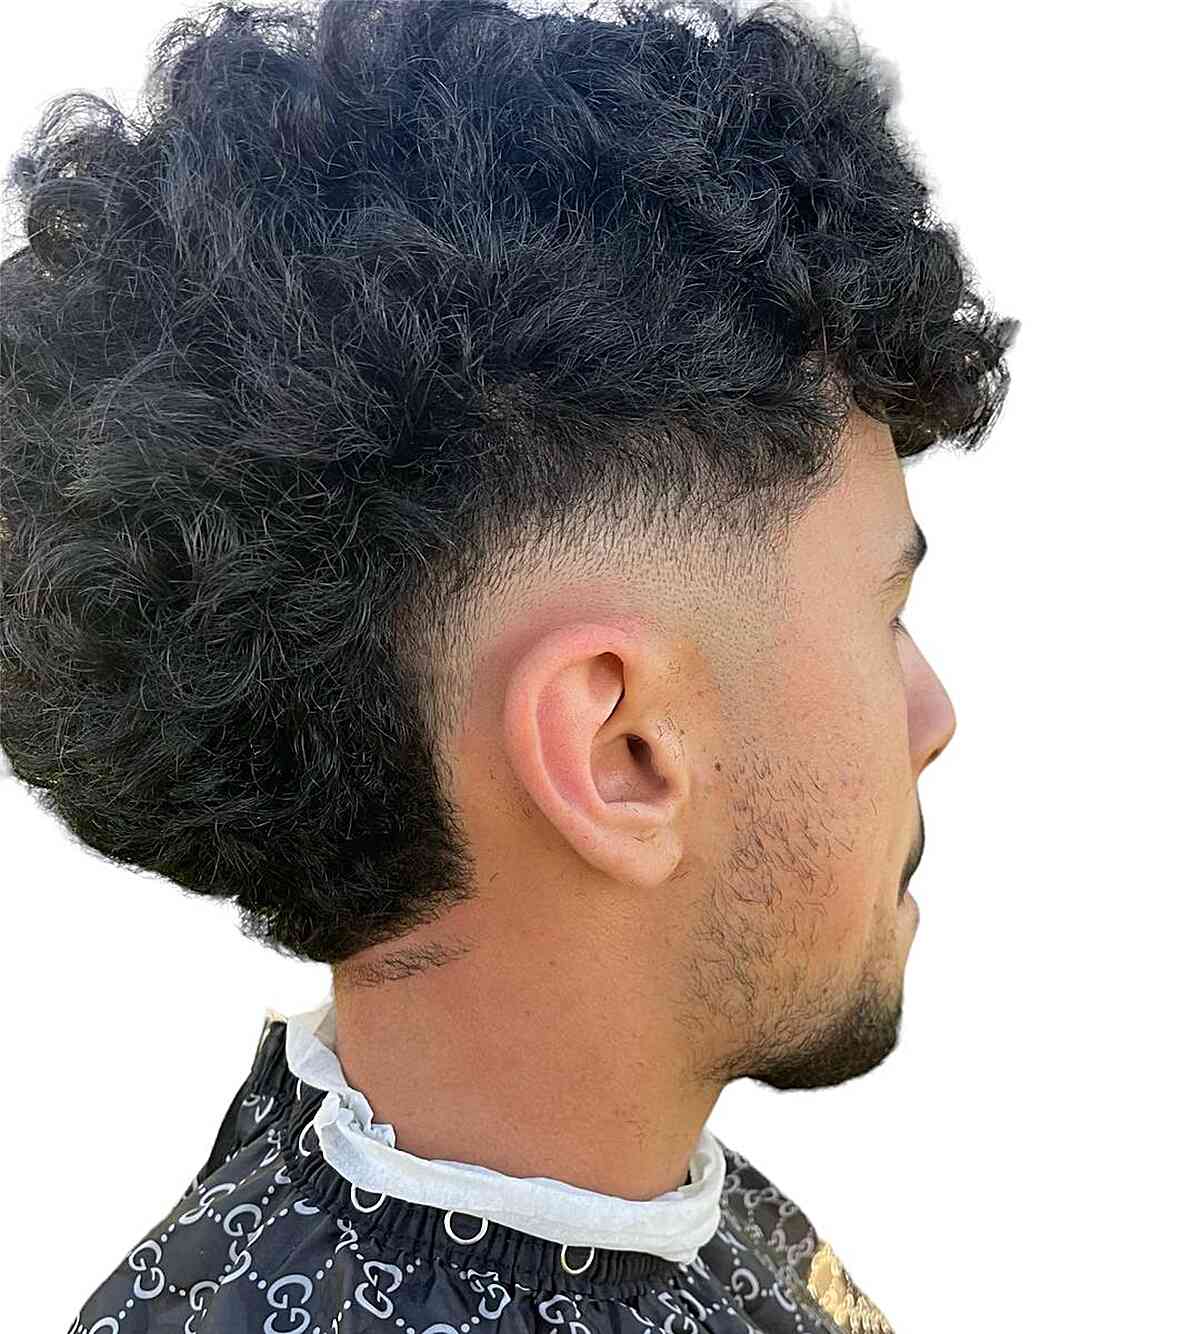 Men's Textured Natural Hair with Low Burst Fade